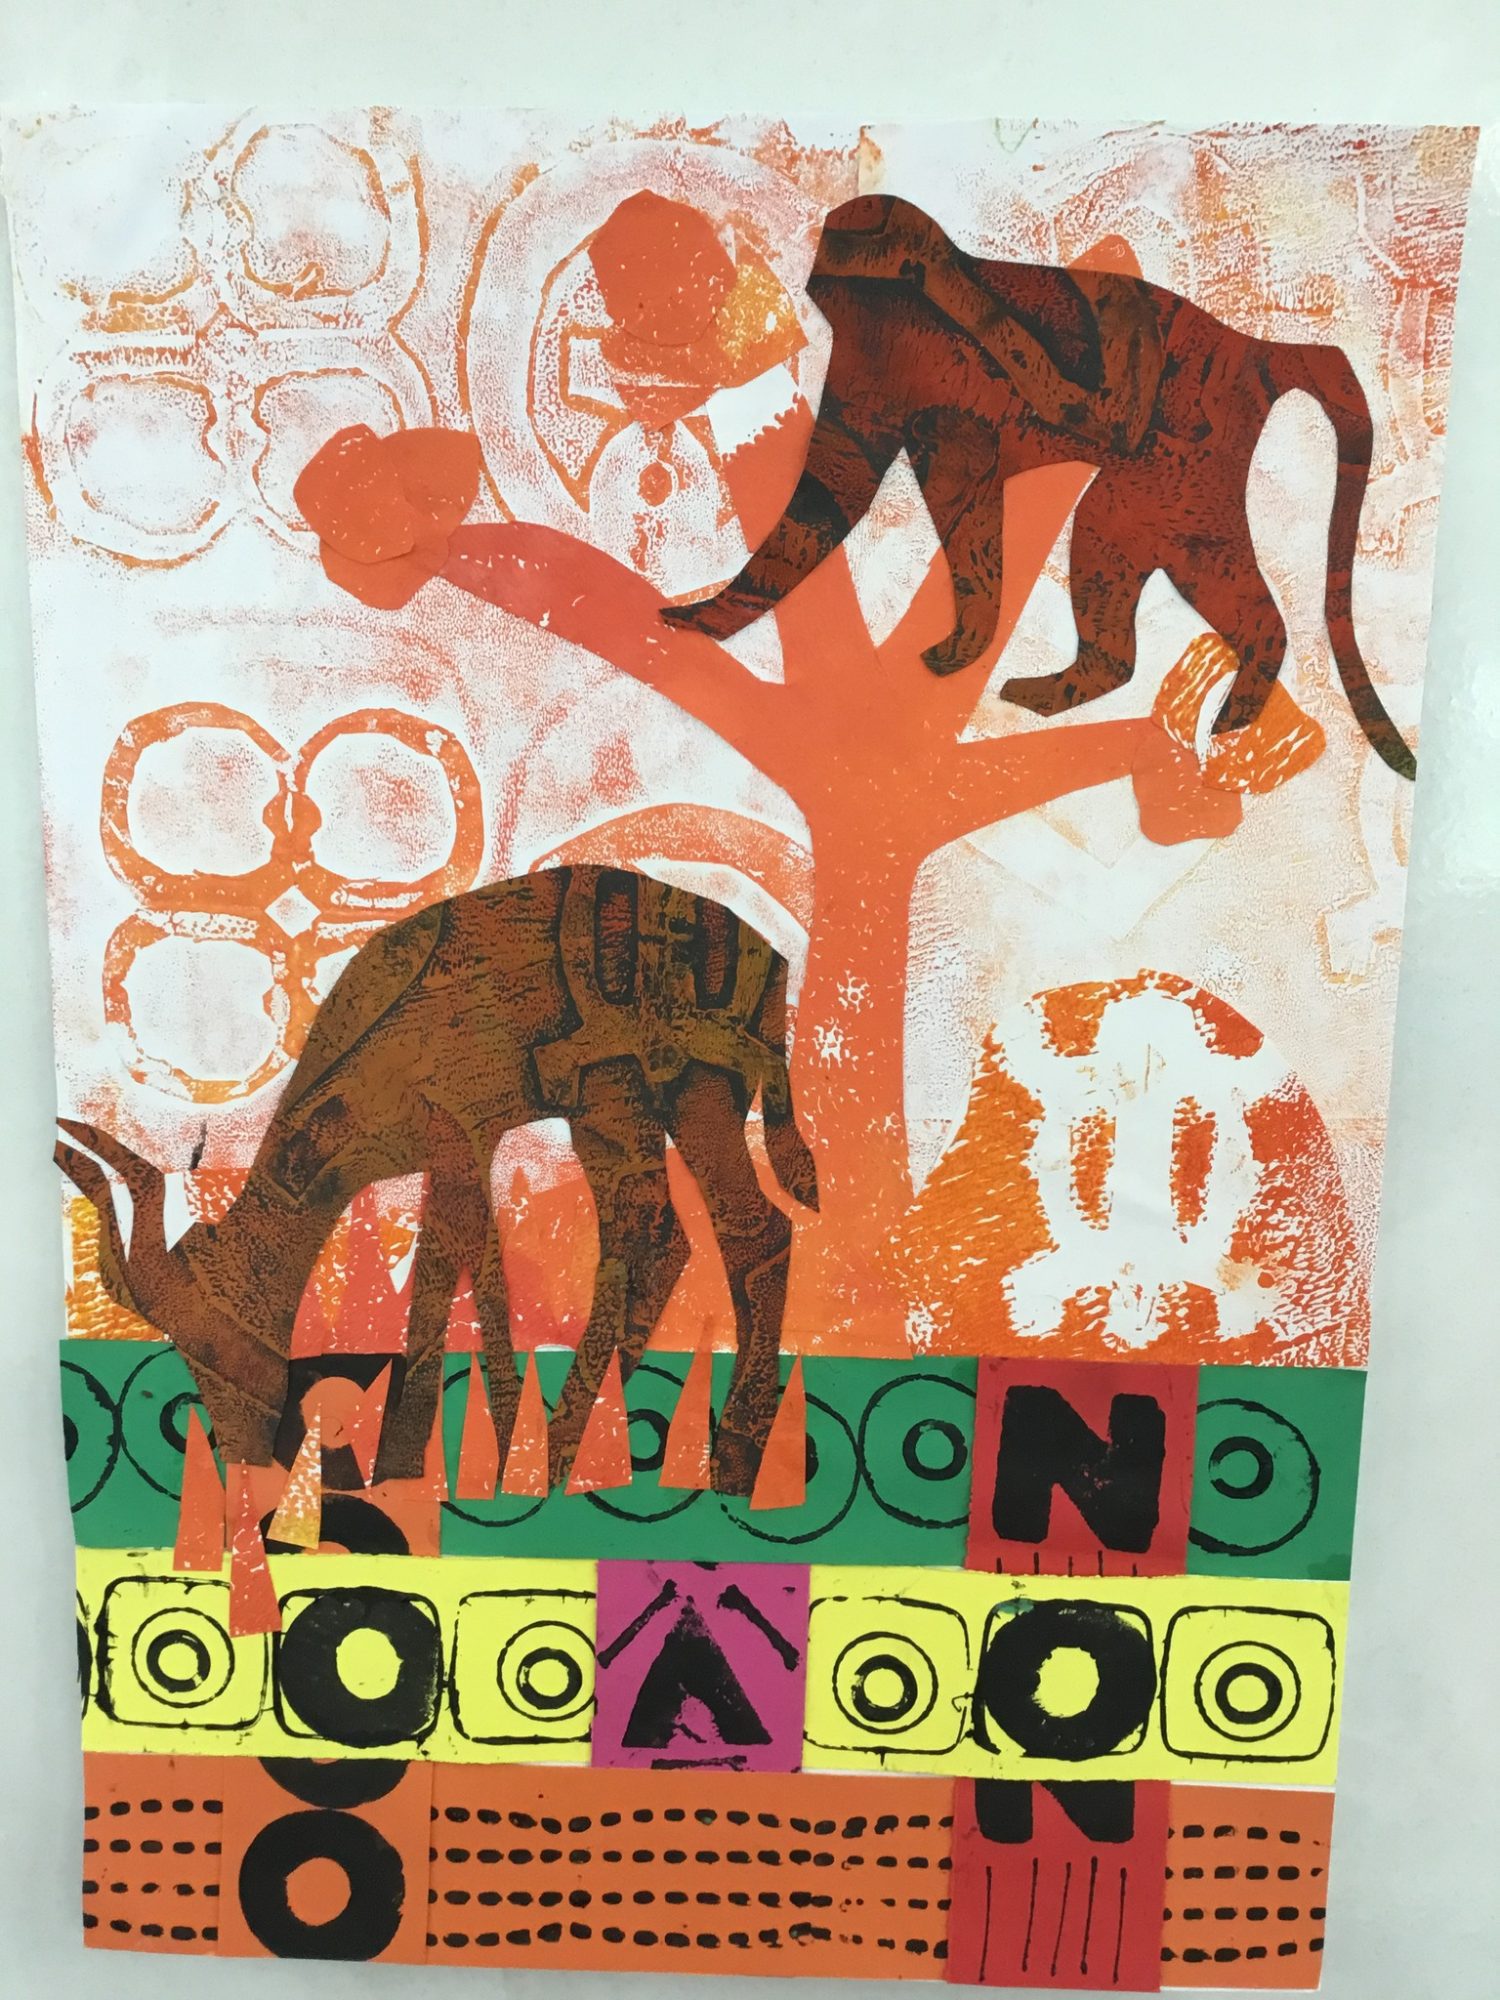 Photo of children learning to monoprint